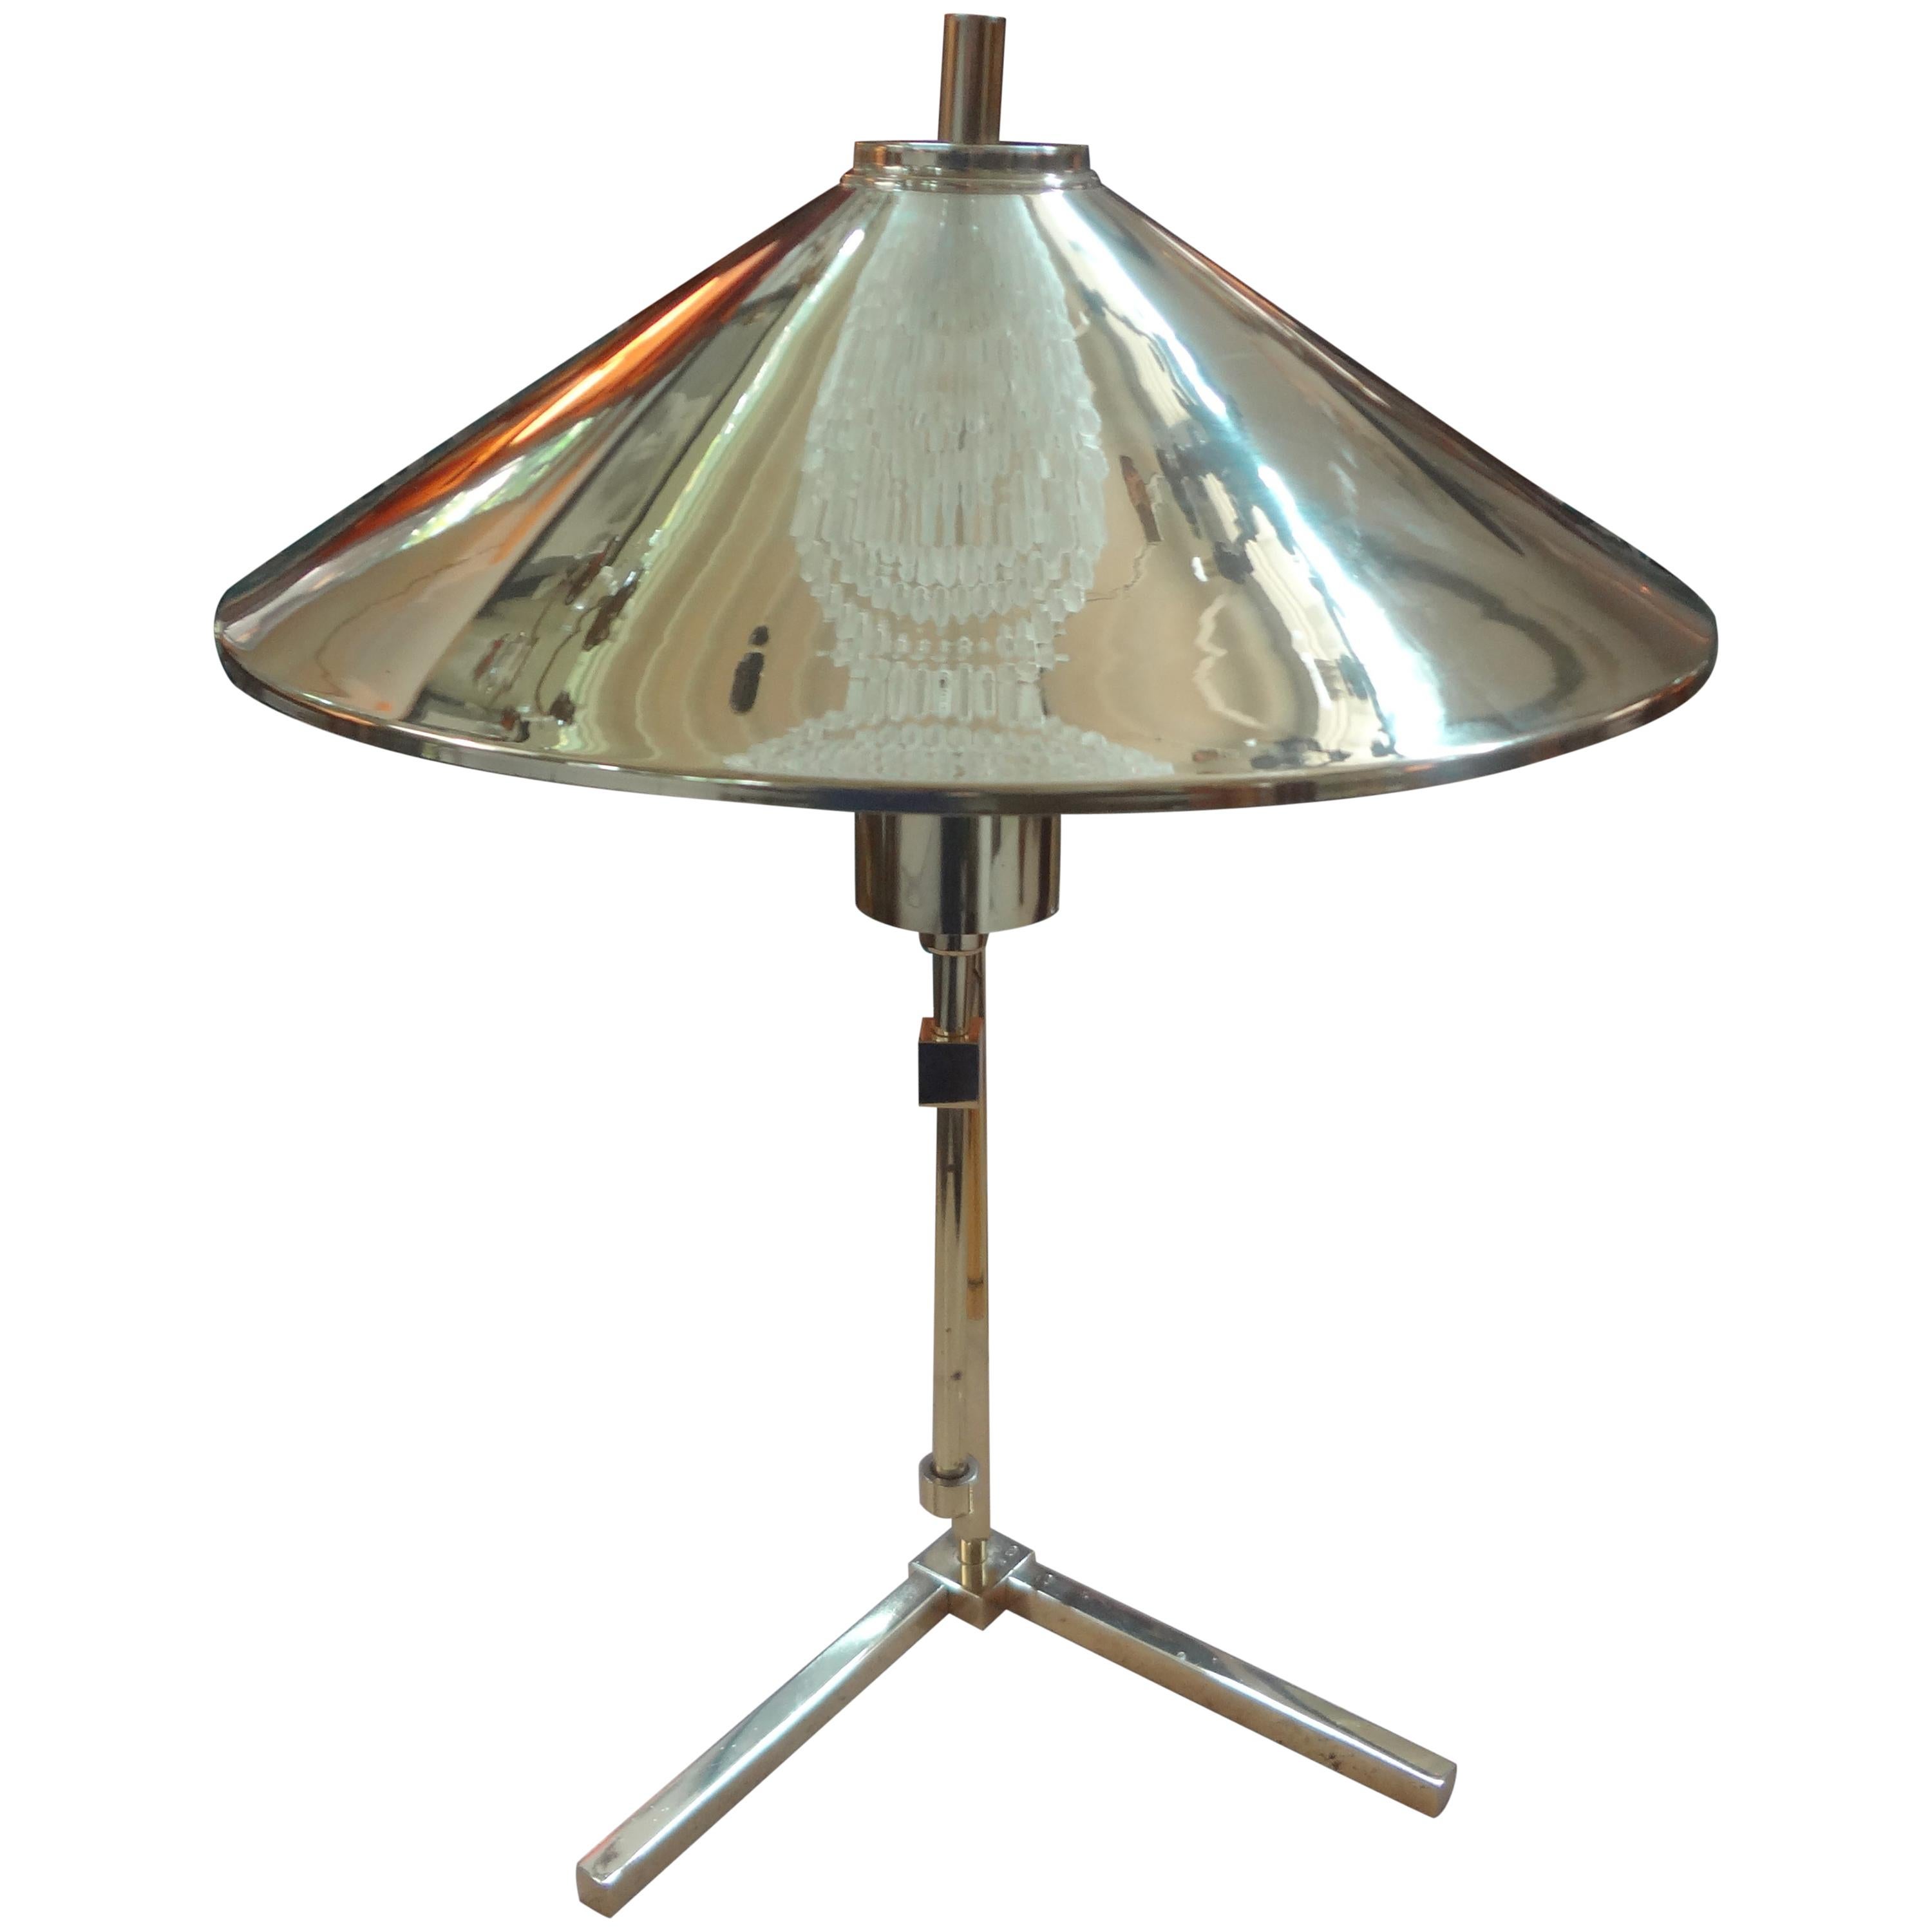 Interesting vintage Stilnovo style polished brass table lamp or desk lamp with a cone shaped brass shade. This interesting brass lamp would look great on a desk, writing table, bedside table or dressing room.